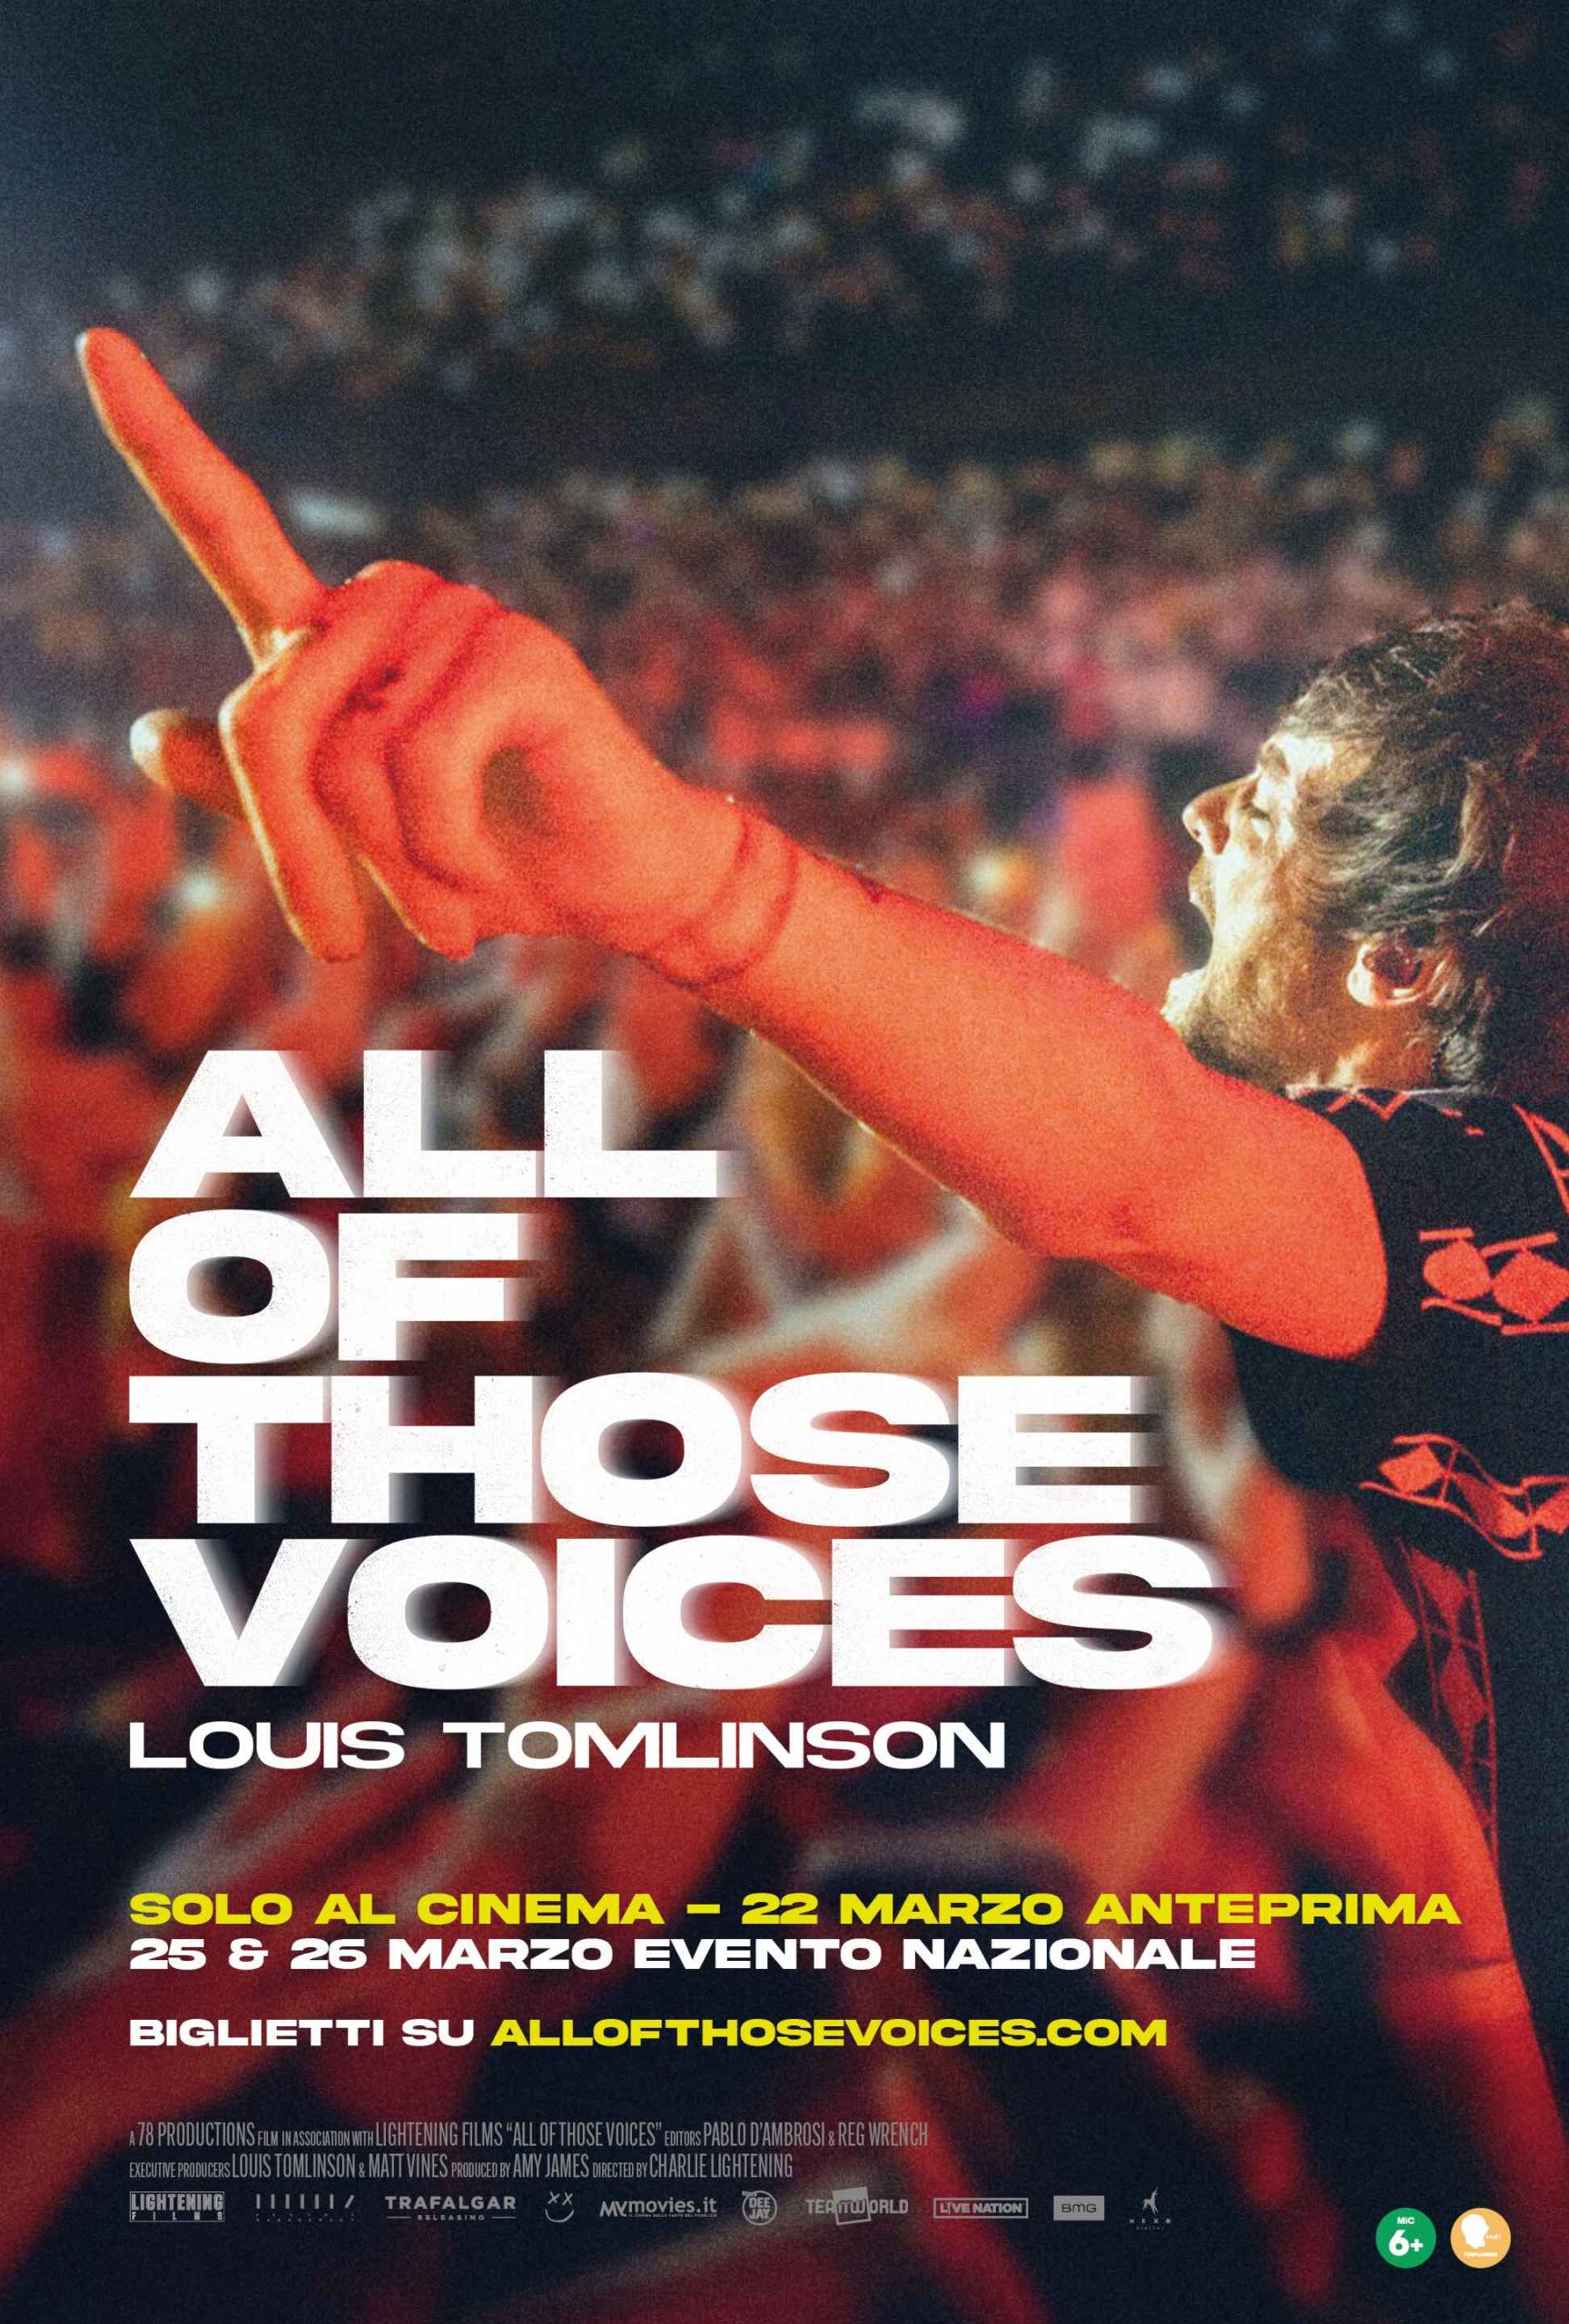 Louis Tomlinson “All Of Those Voices” trionfa al Box Office